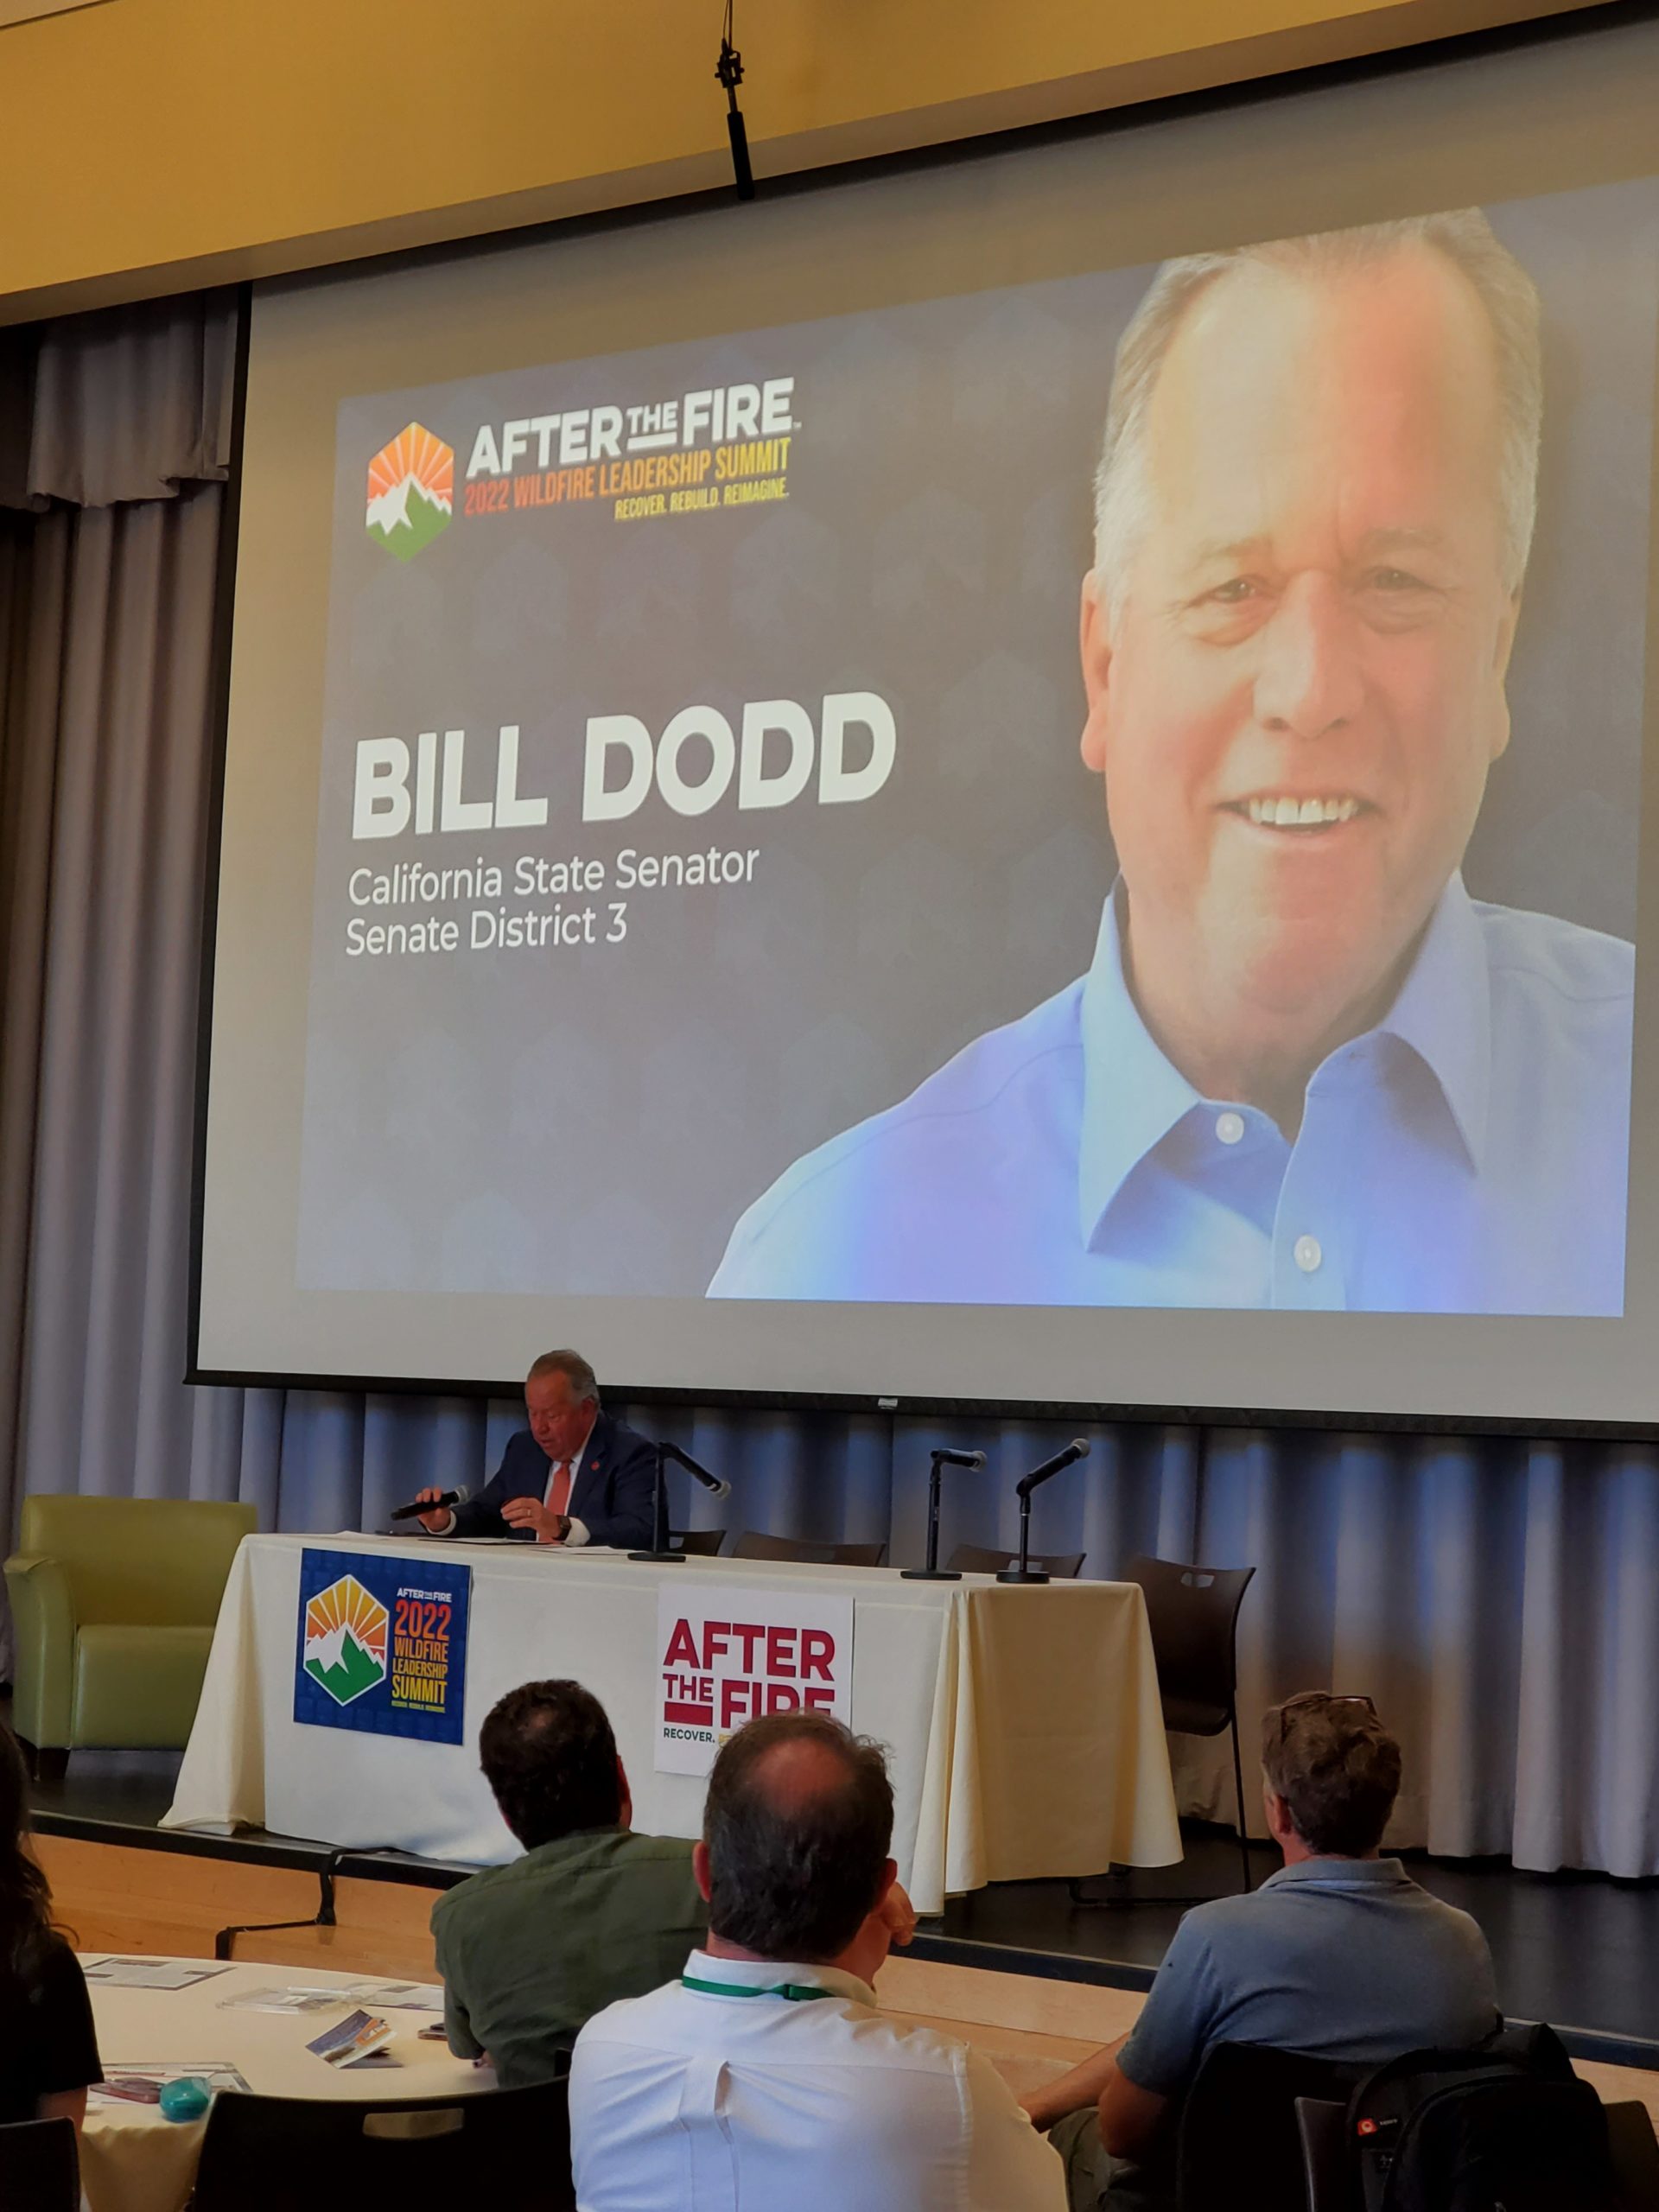 We were honored to have CA State Senator Bill Dodd join us to share efforts related to wildfire mitigation and recovery that is happening in the state legislature